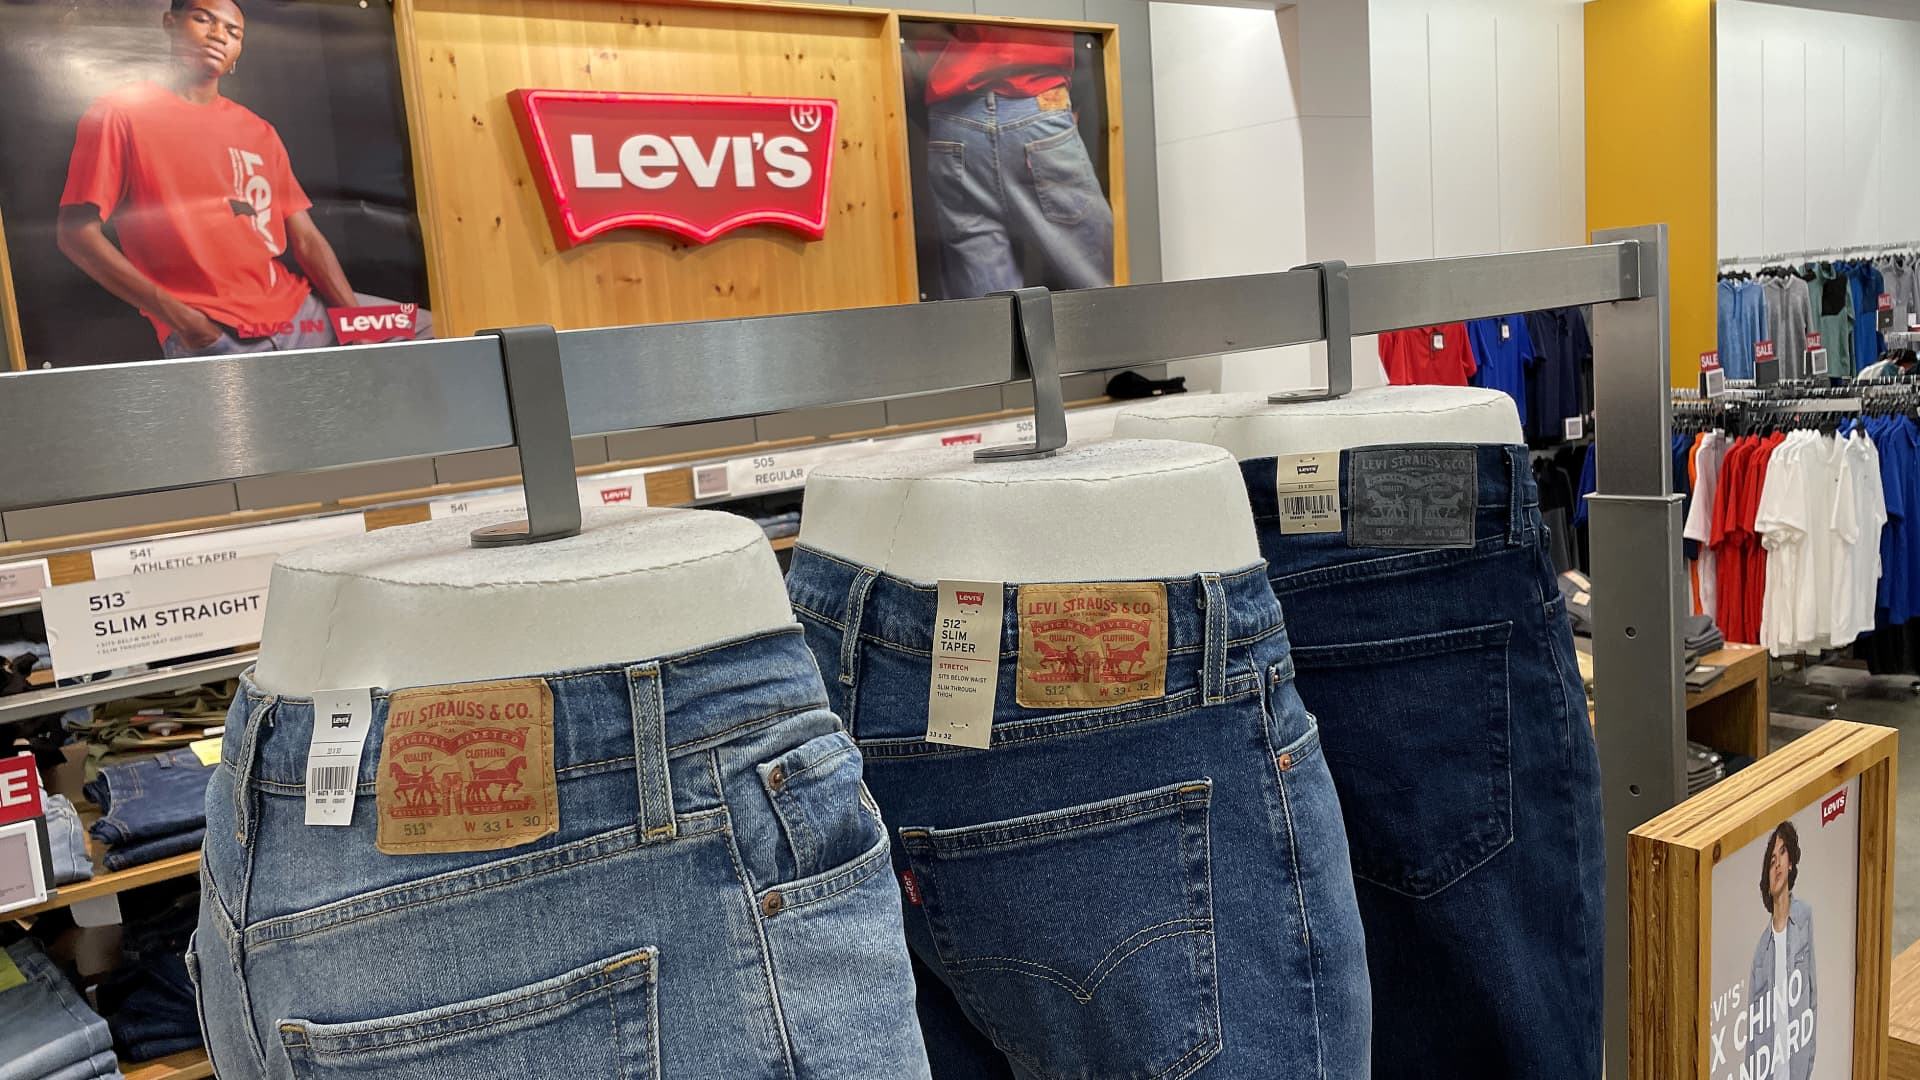 Nearly half of Levi’s sales are happening online and in its shops, a shift as department stores fade